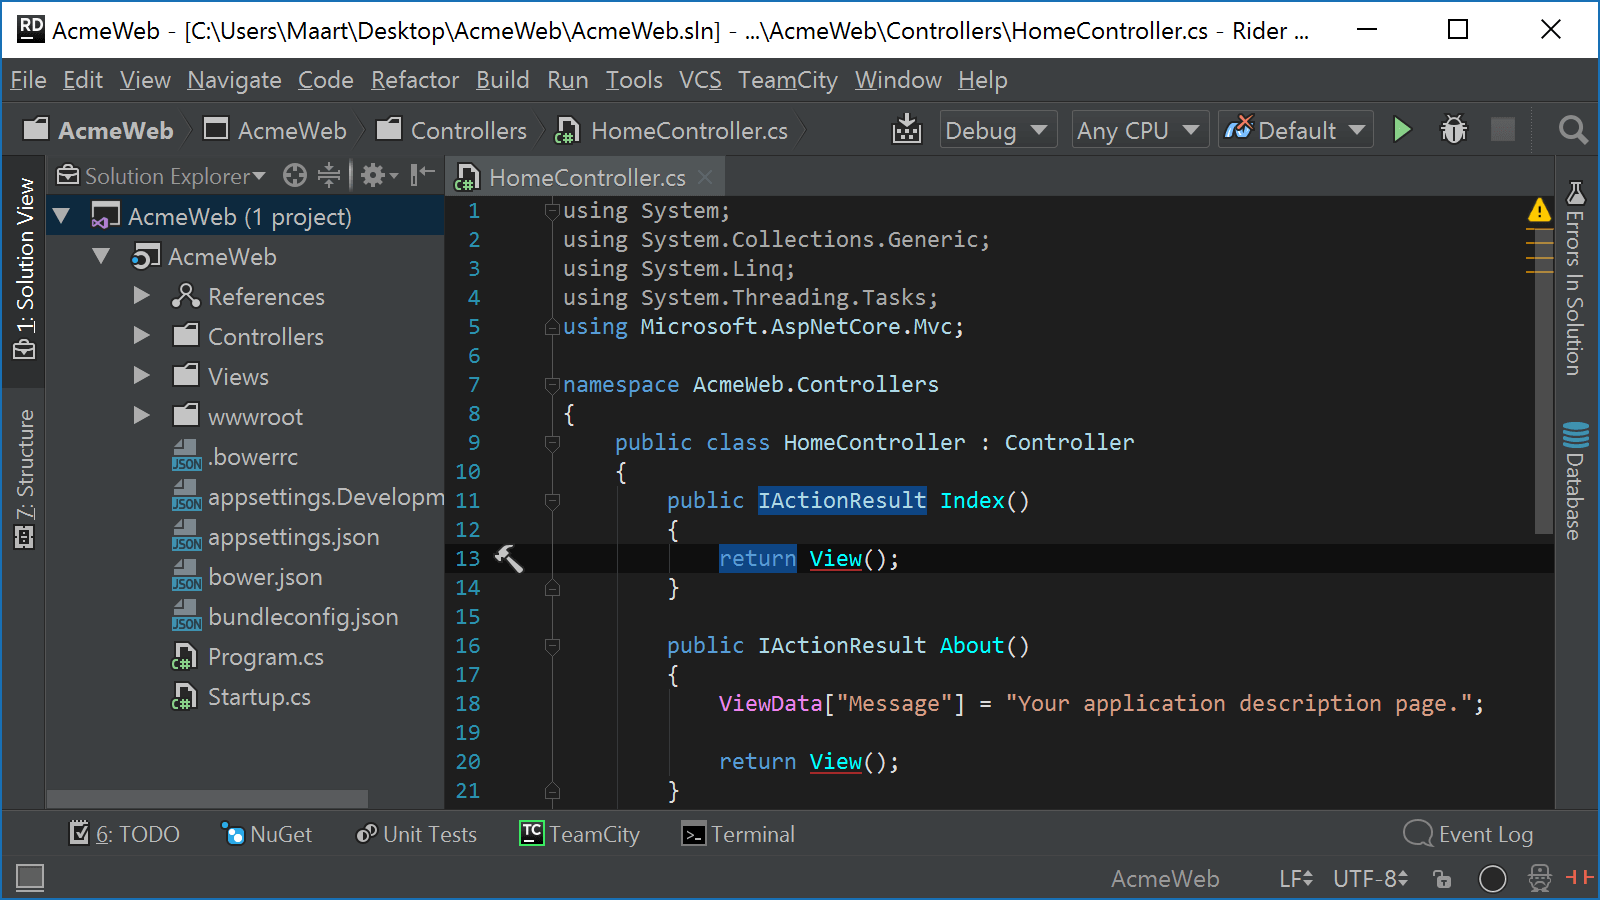 Jump to Source to edit .csproj project file